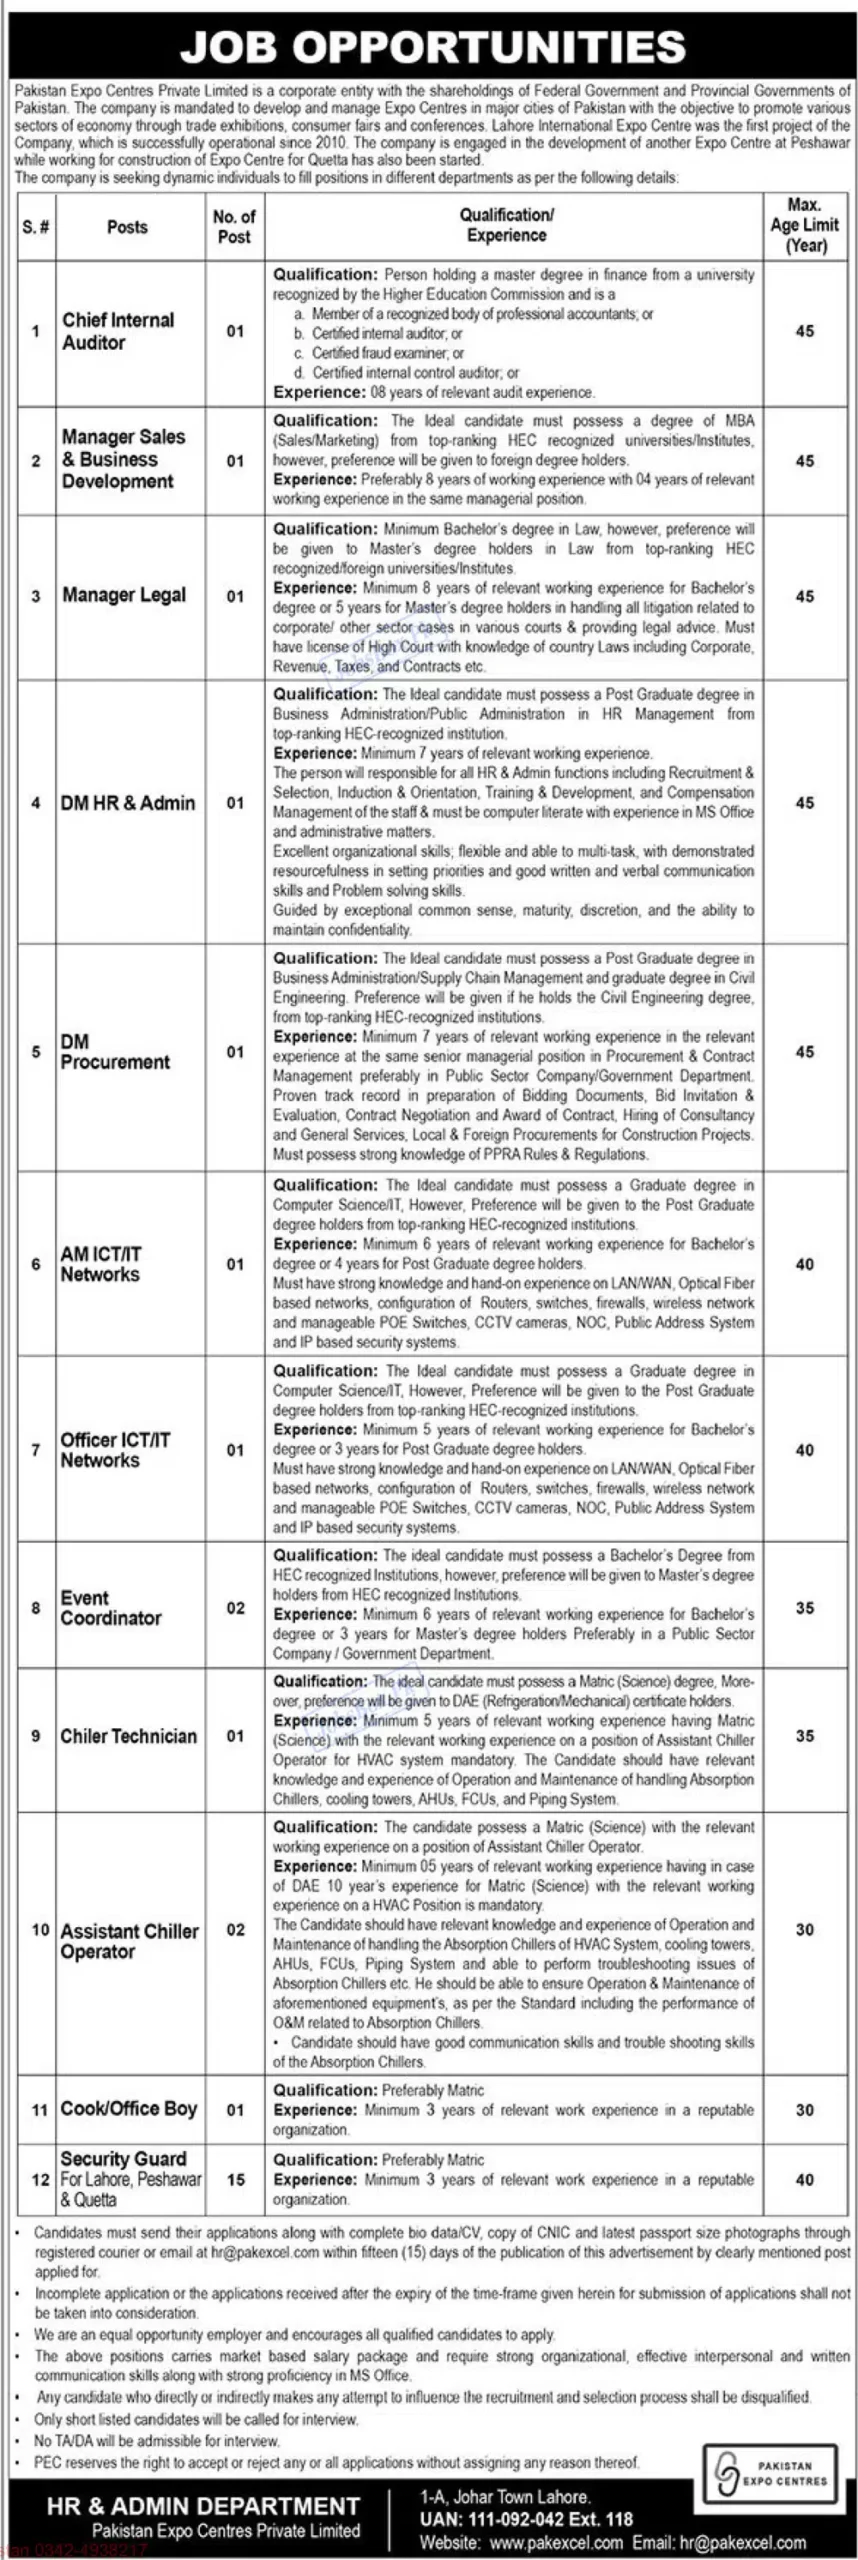 Pakistan Expo Centres Private Limited Jobs 2023 | Apply Online 